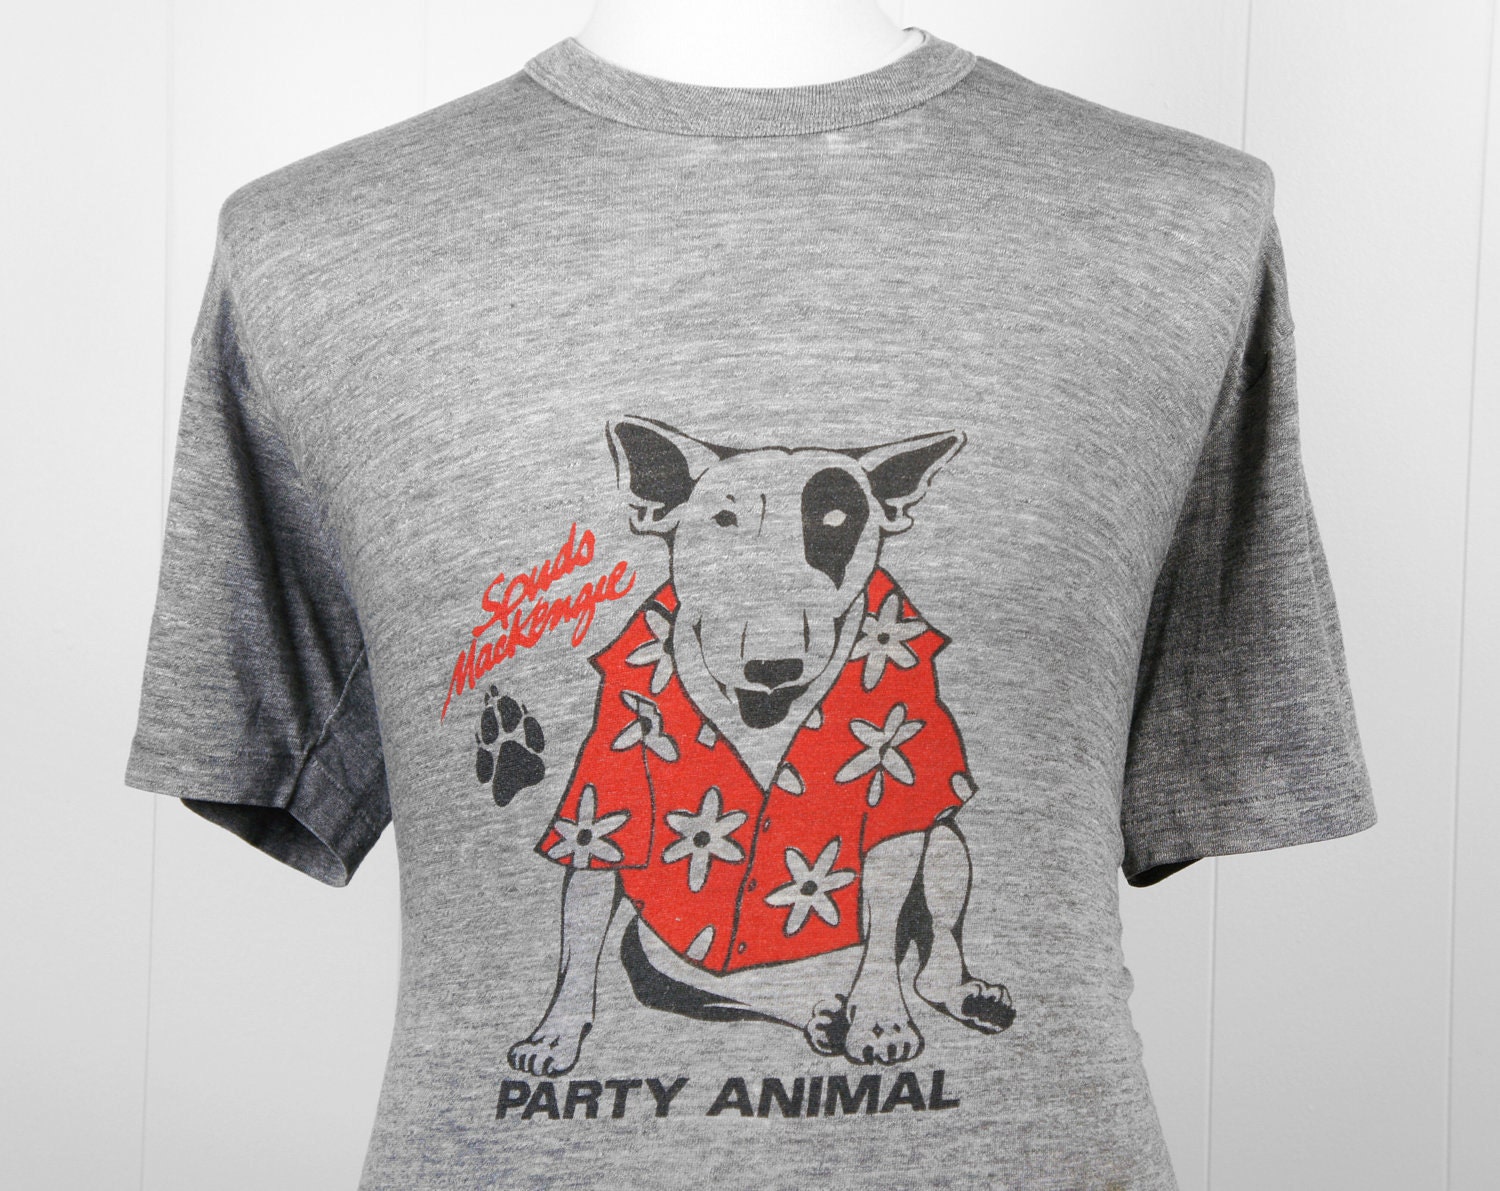 Vintage 1980's Spuds Mackenzie Party Animal T-Shirt Size